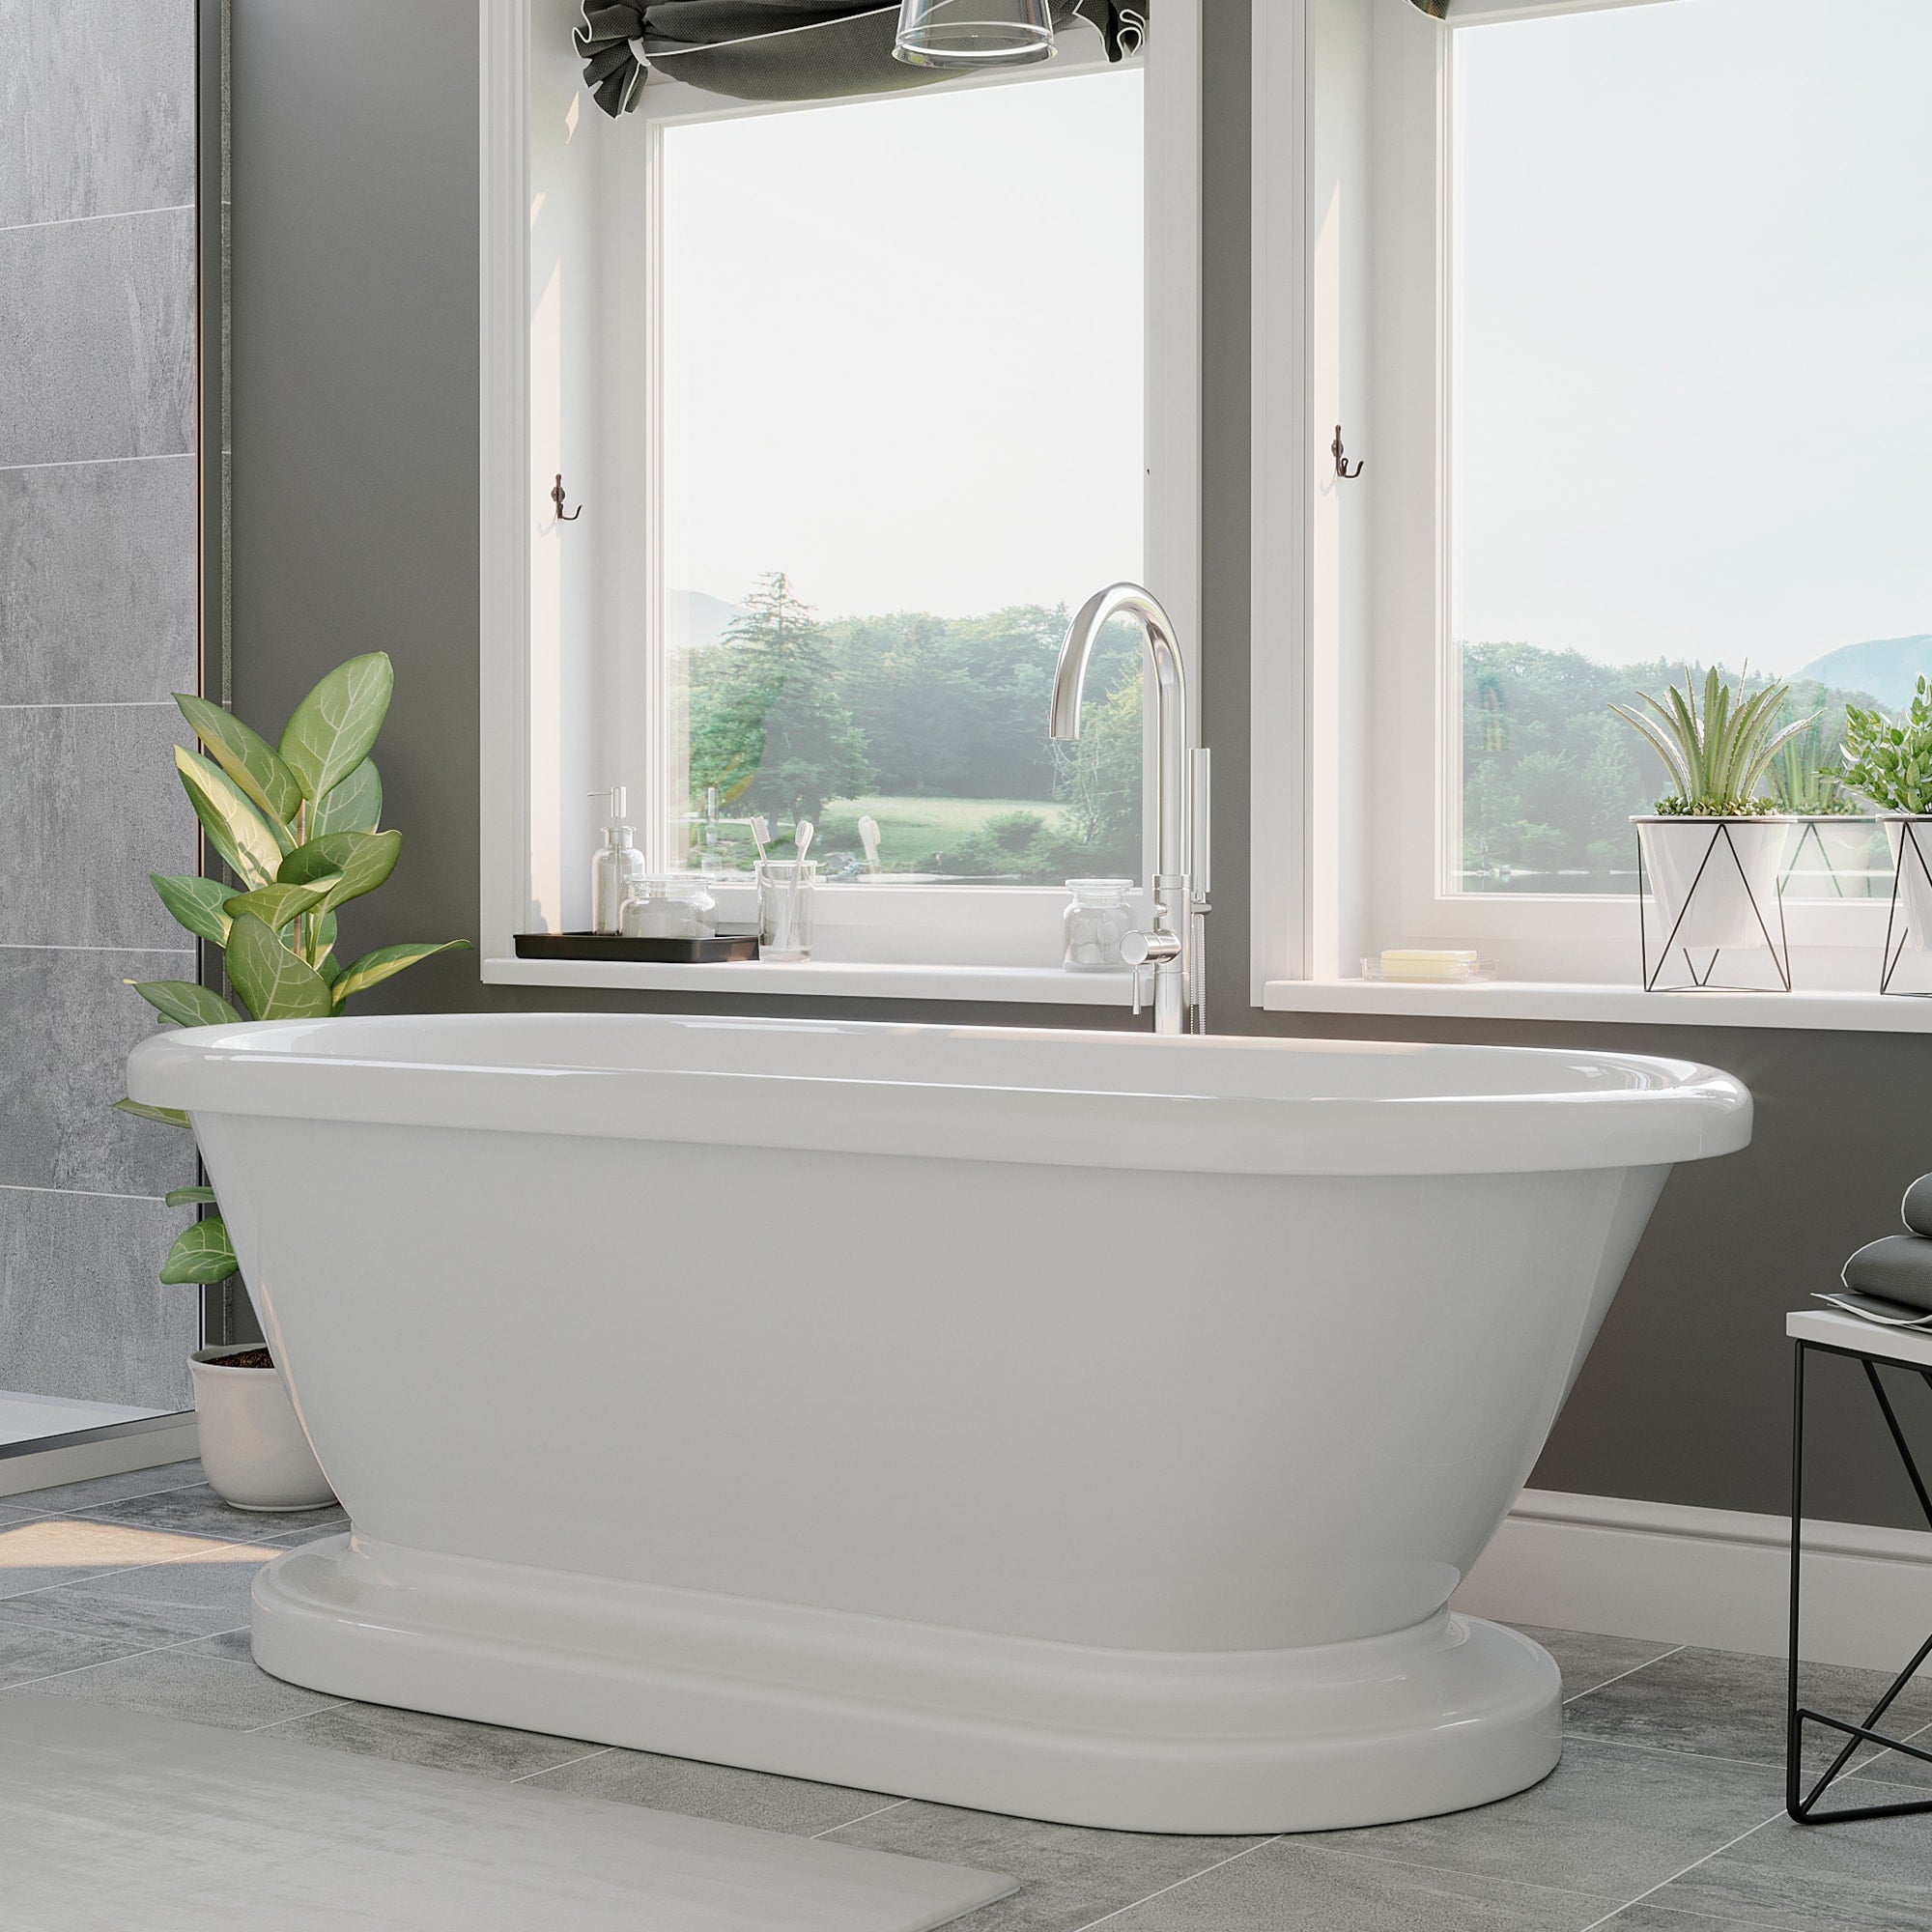 Cambridge Plumbing Double Ended Acrylic Pedestal Bathtub (White Gloss Finish) with Continuous Rim and Complete Plumbing Package - Brushed nickel tub filler - ADEP60-150-PKG-NH - Actual Dimensions: 24 1/2" H x 29" W x 59 1/2" L - Vital Hydrotherapy